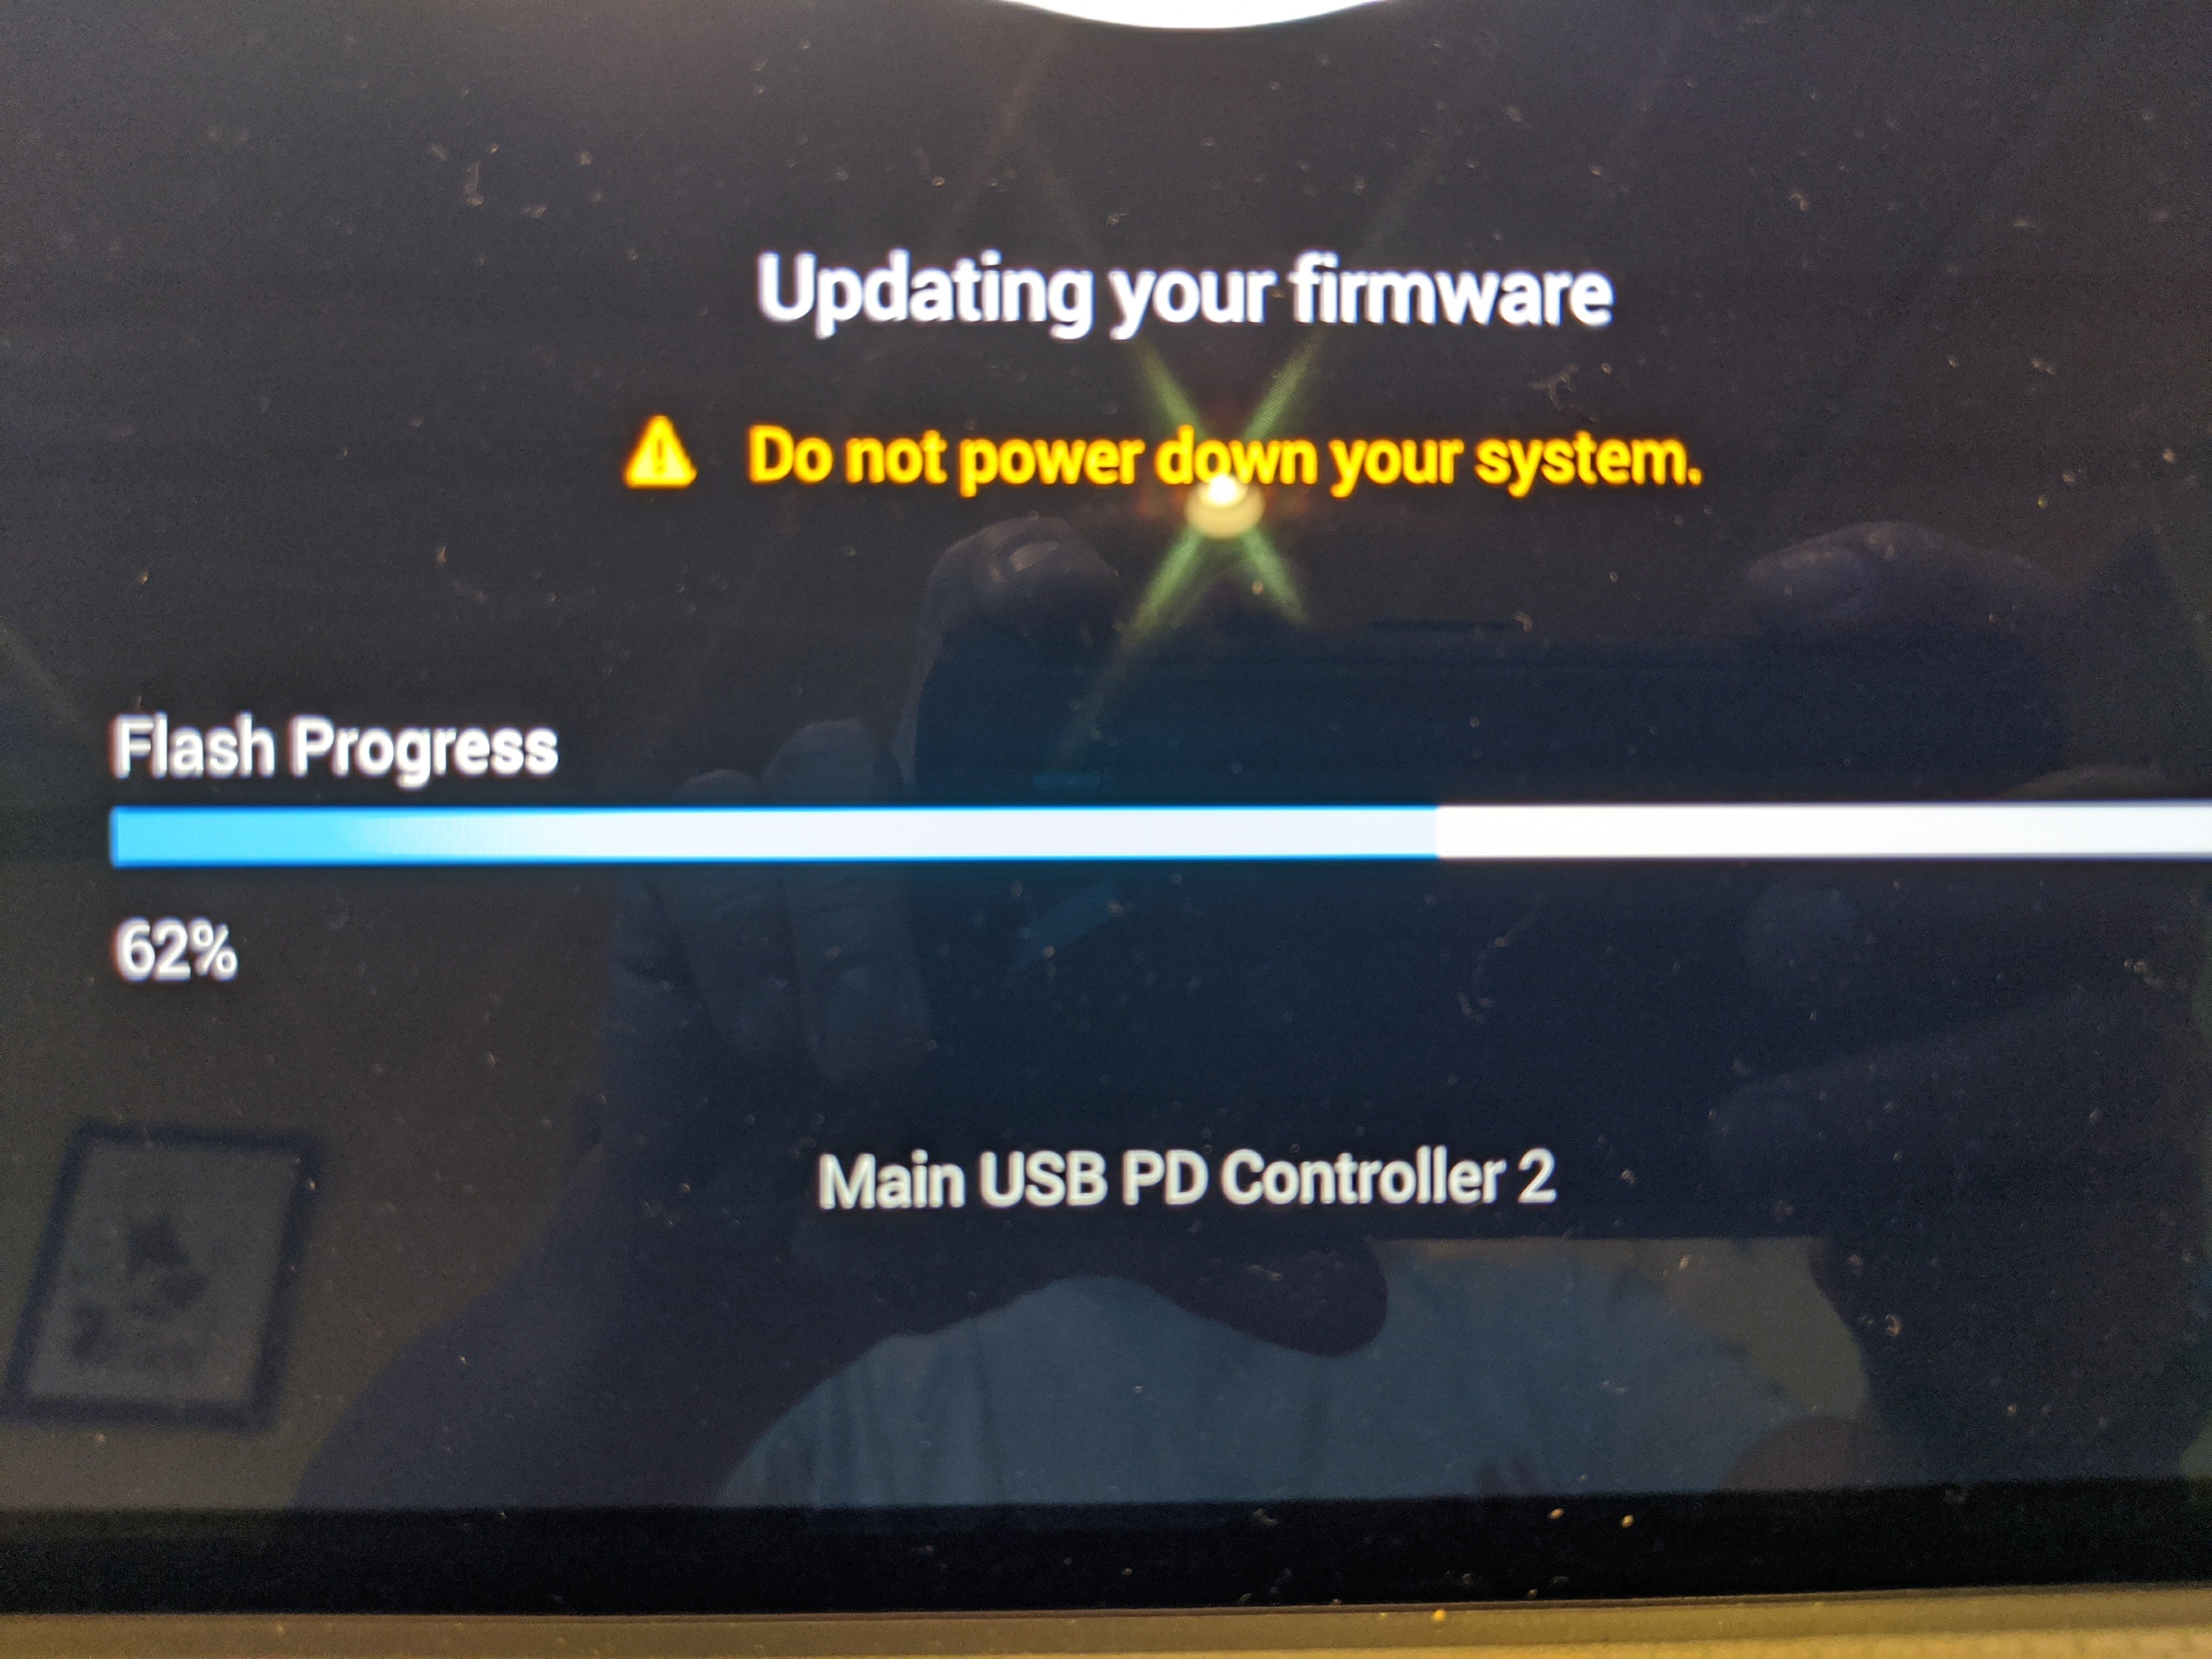 dell update drivers utility